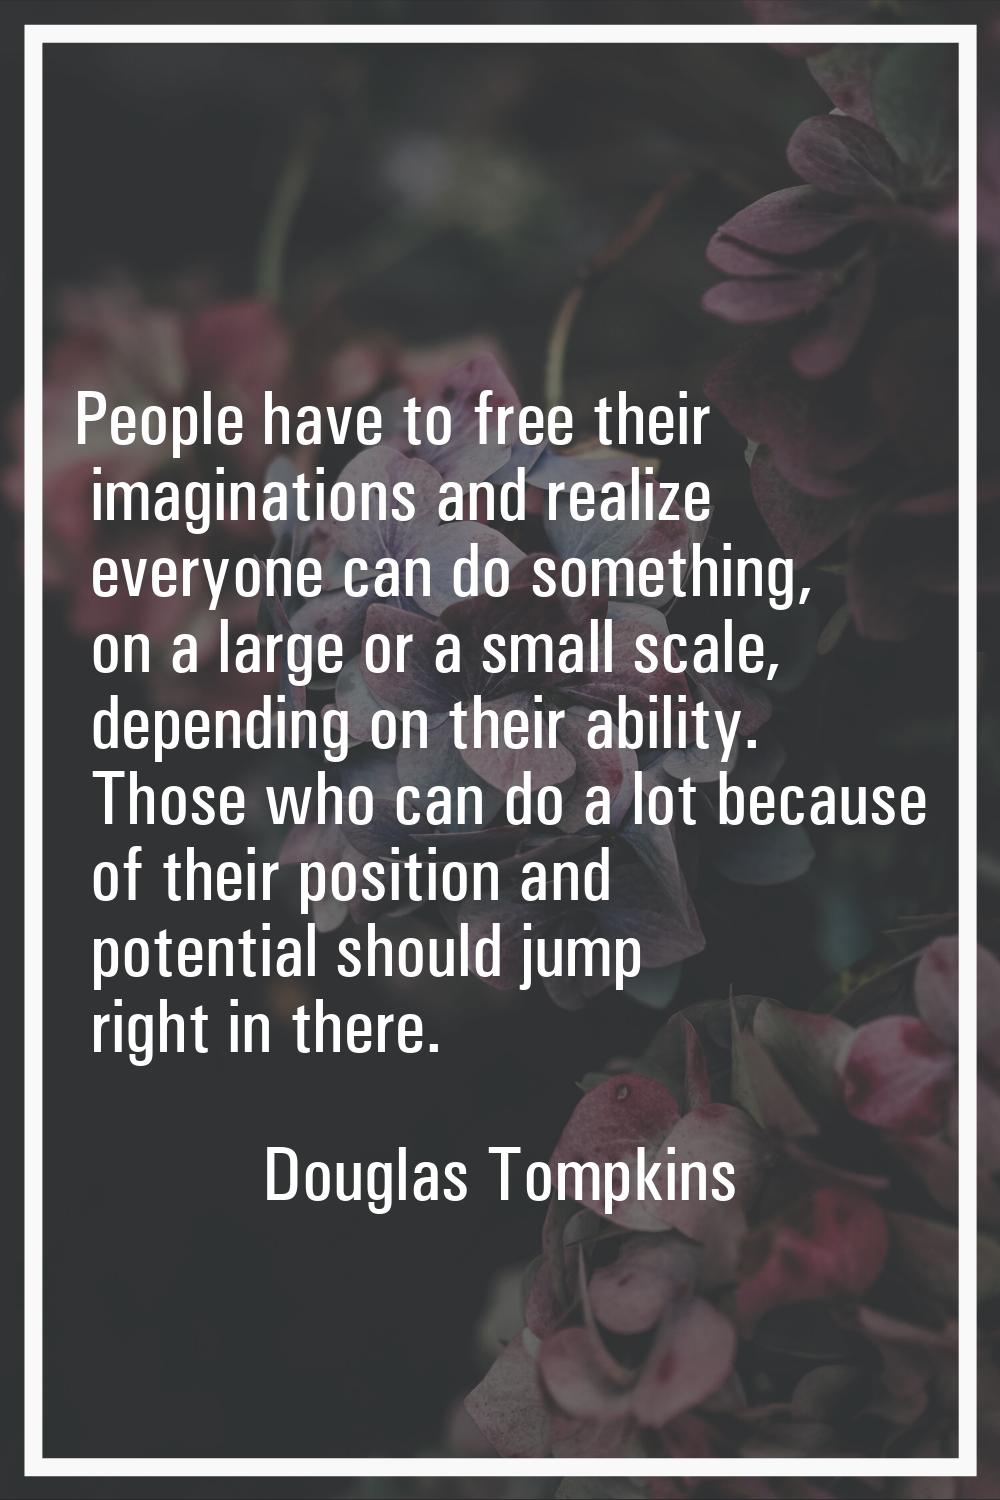 People have to free their imaginations and realize everyone can do something, on a large or a small